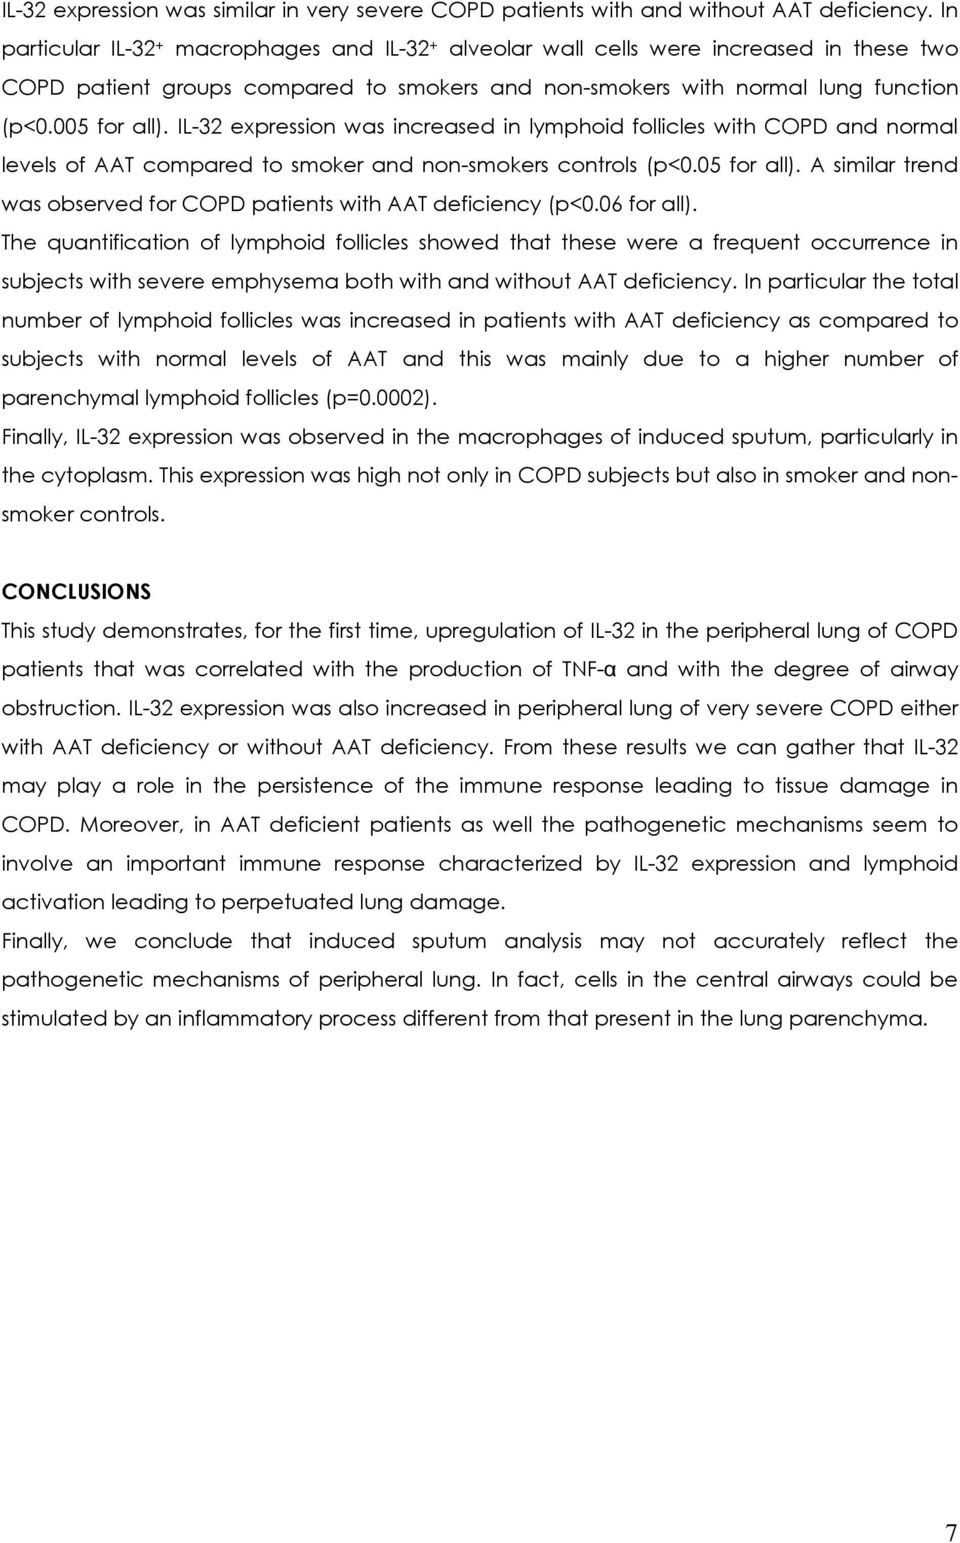 IL-32 expression was increased in lymphoid follicles with COPD and normal levels of AAT compared to smoker and non-smokers controls (p<0.05 for all).